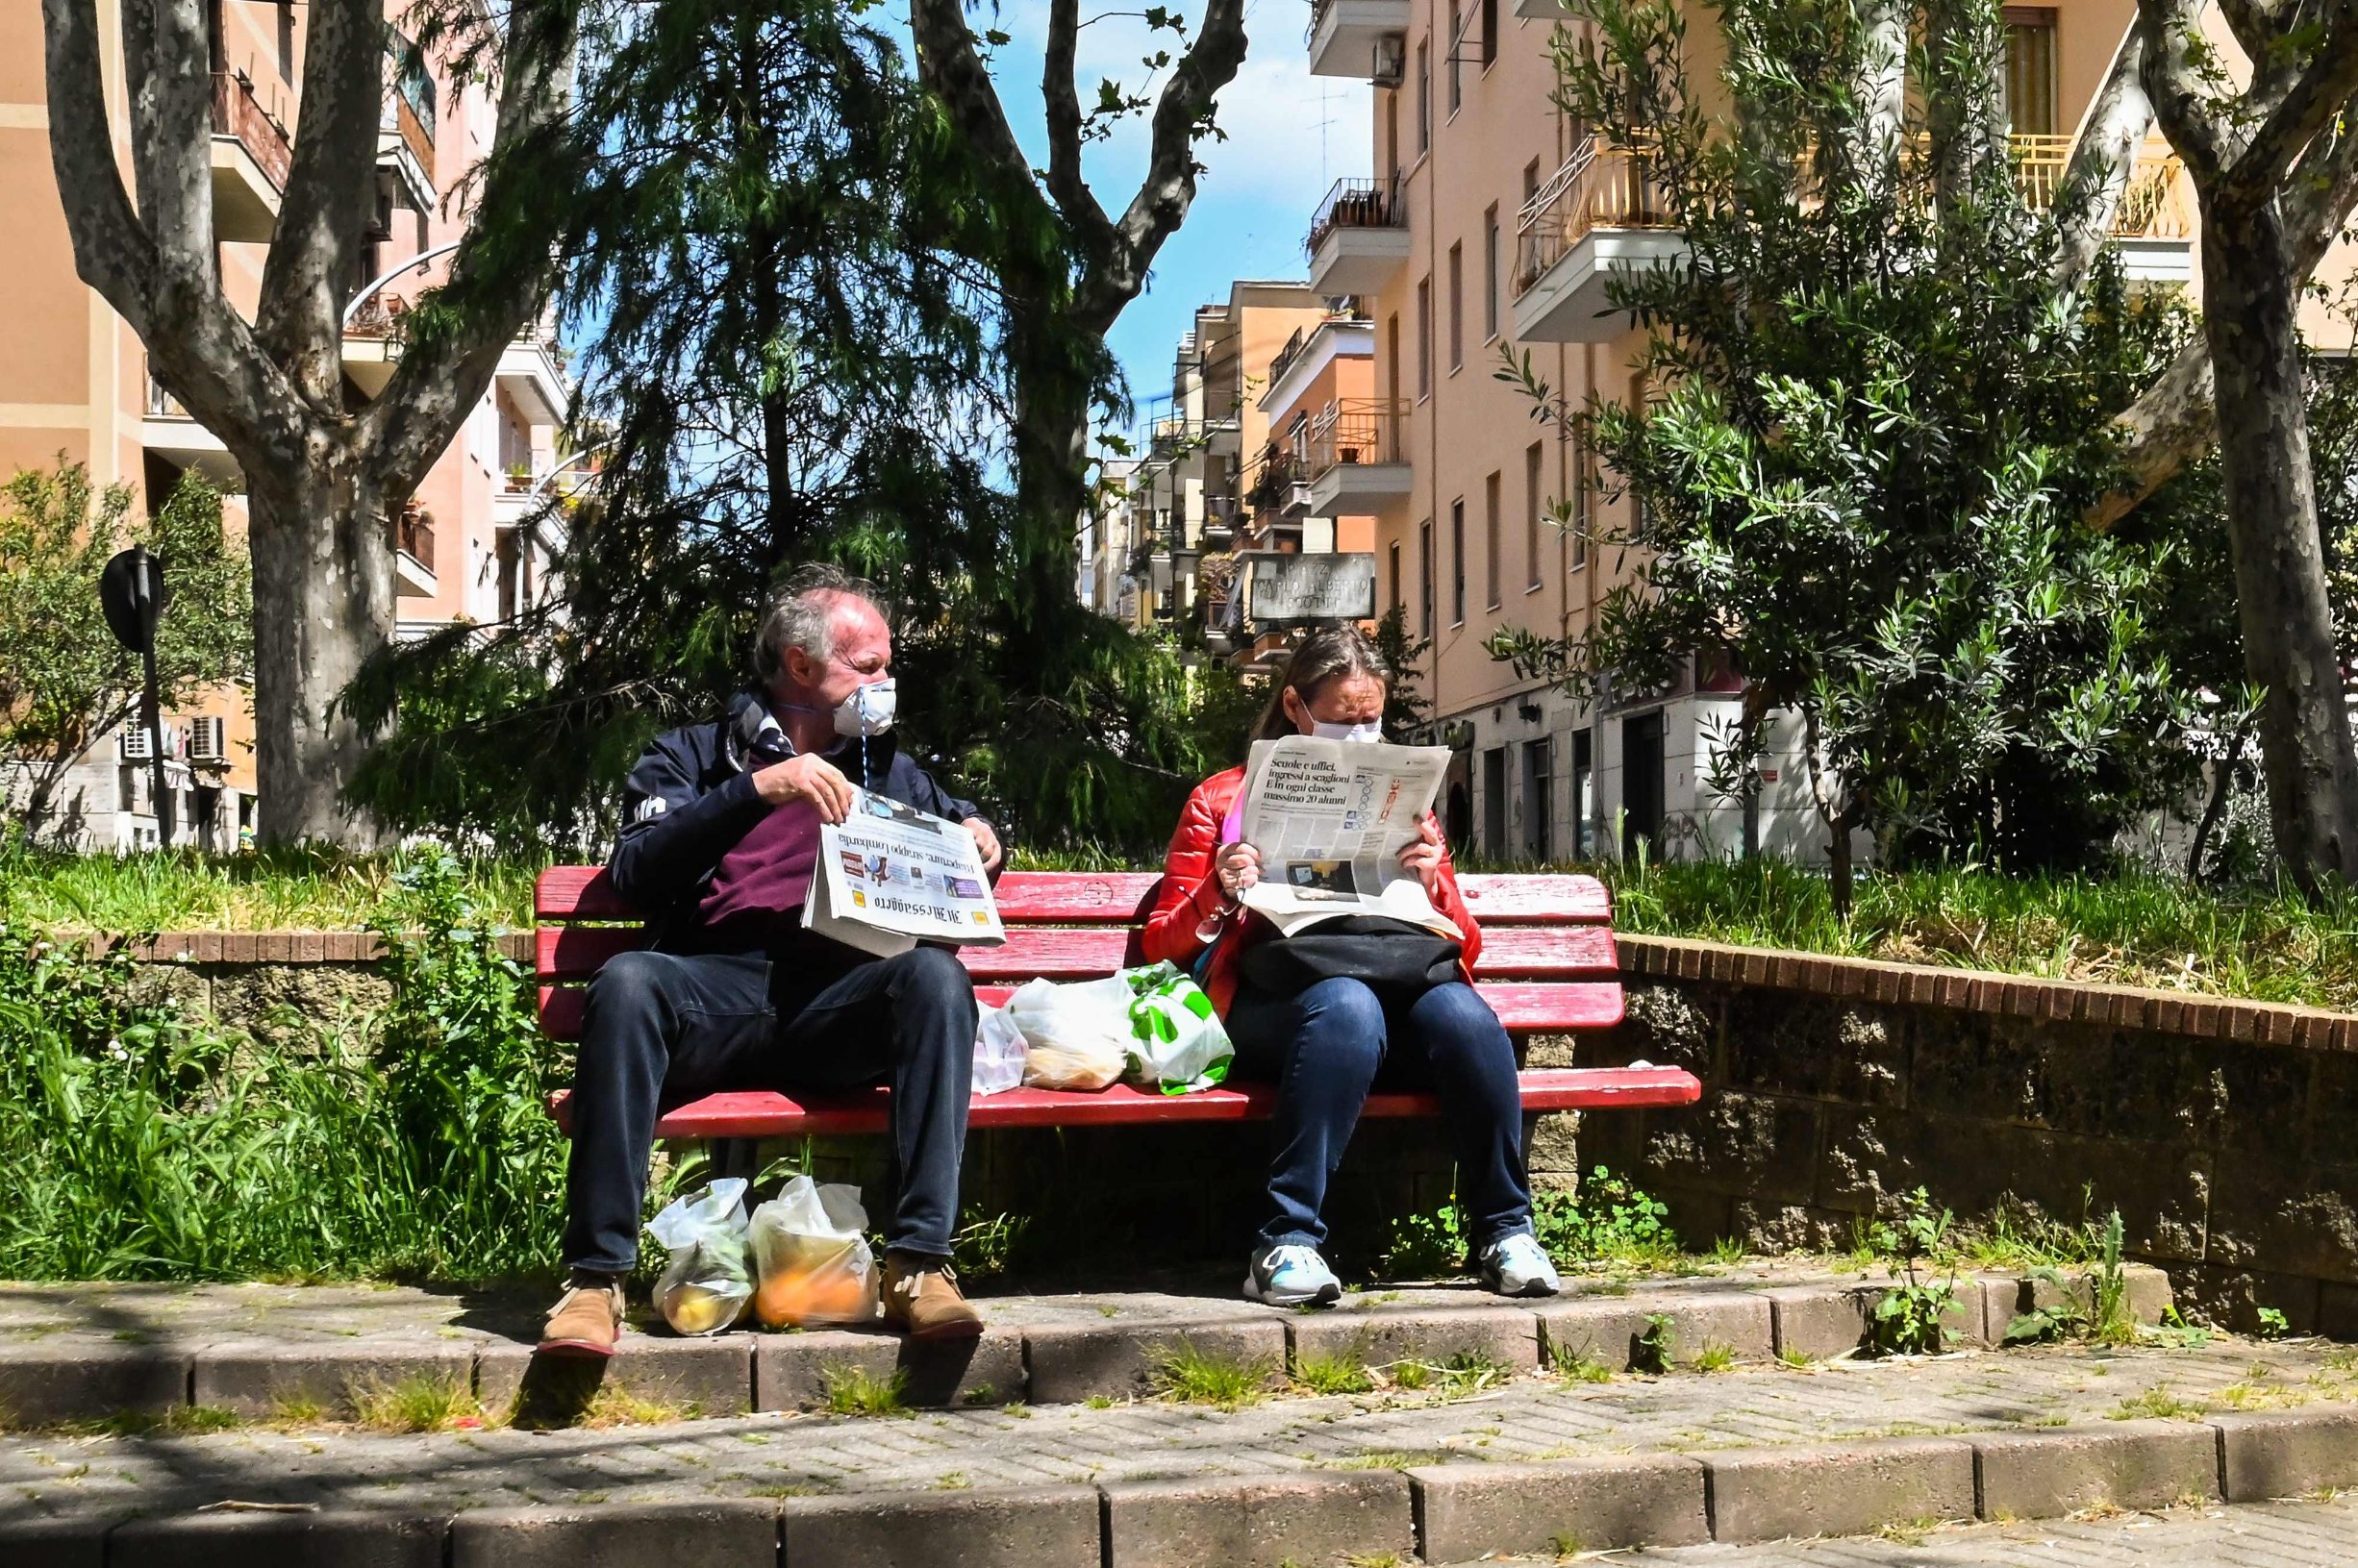 TOPSHOT - People wearing protective masks, read the newspaper as they sit in a square in the district of Monteverde Nuovo in Rome on April 16, 2020, as the nation tries to curb the spread of the COVID-19 epidemic caused by the new coronavirus. (Photo by Andreas SOLARO / AFP)